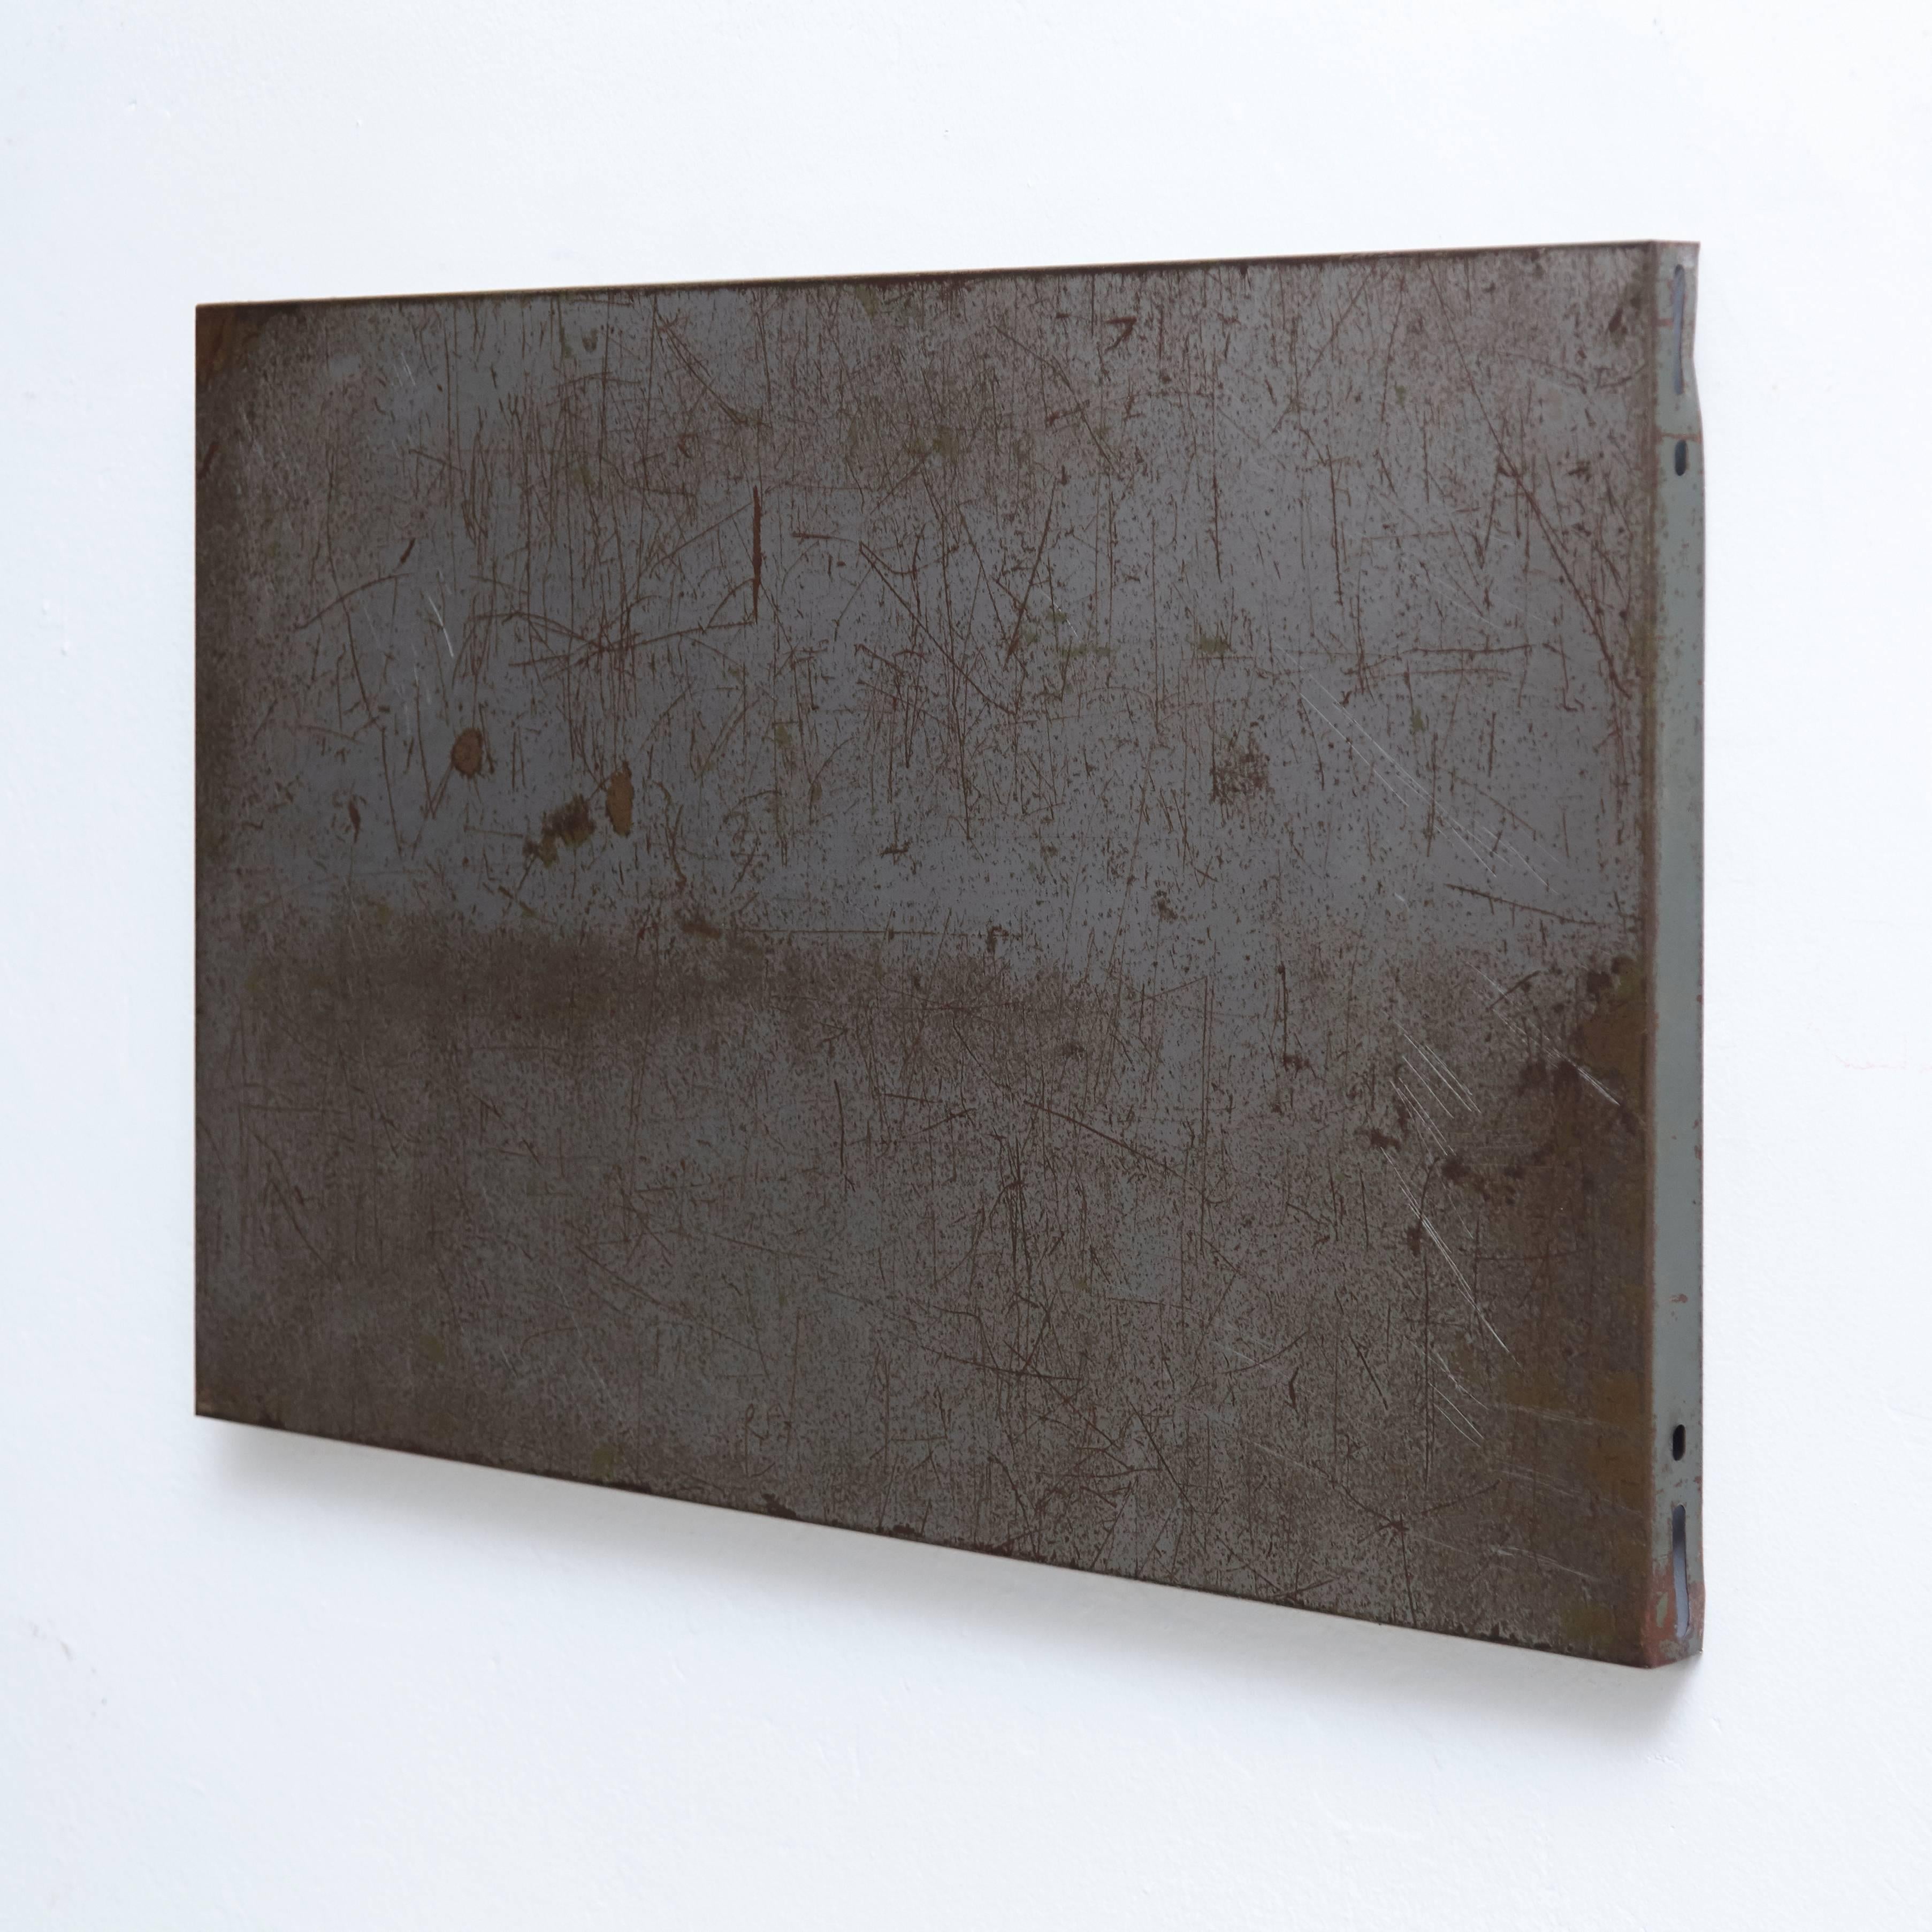 Ramon Horts, minimalism artwork.

Structures of metal compositions made in Barcelona, circa 2017. For a solo exhibition.
Signed by himself in engraving punch.

Scraped/stripping metal, rusted and varnished. 
In original conditions.